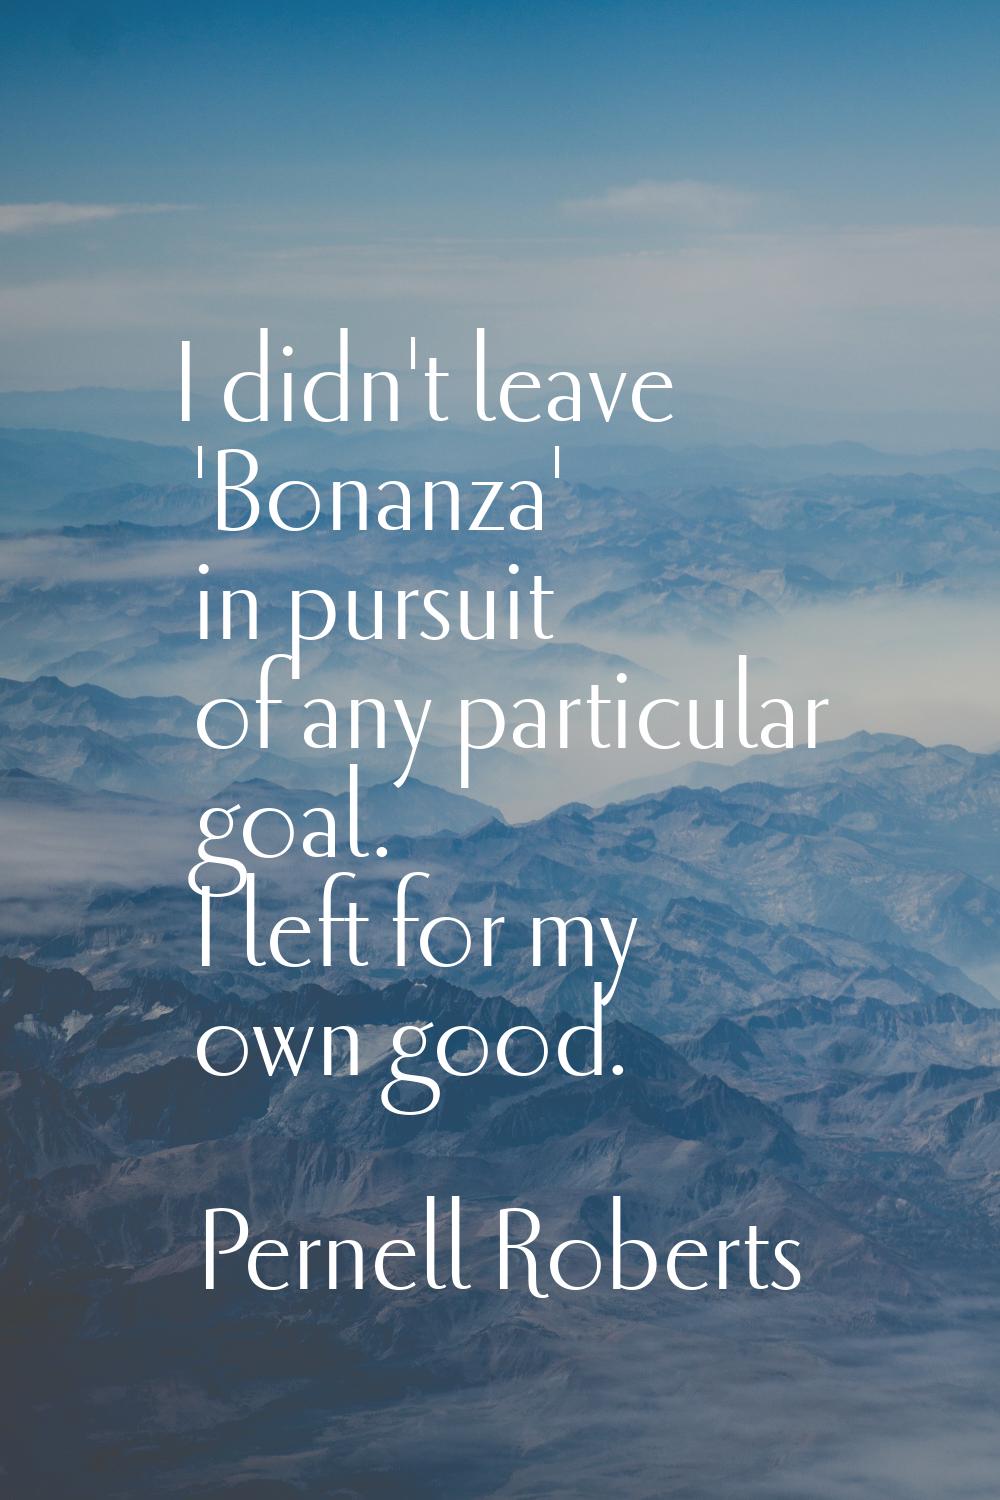 I didn't leave 'Bonanza' in pursuit of any particular goal. I left for my own good.